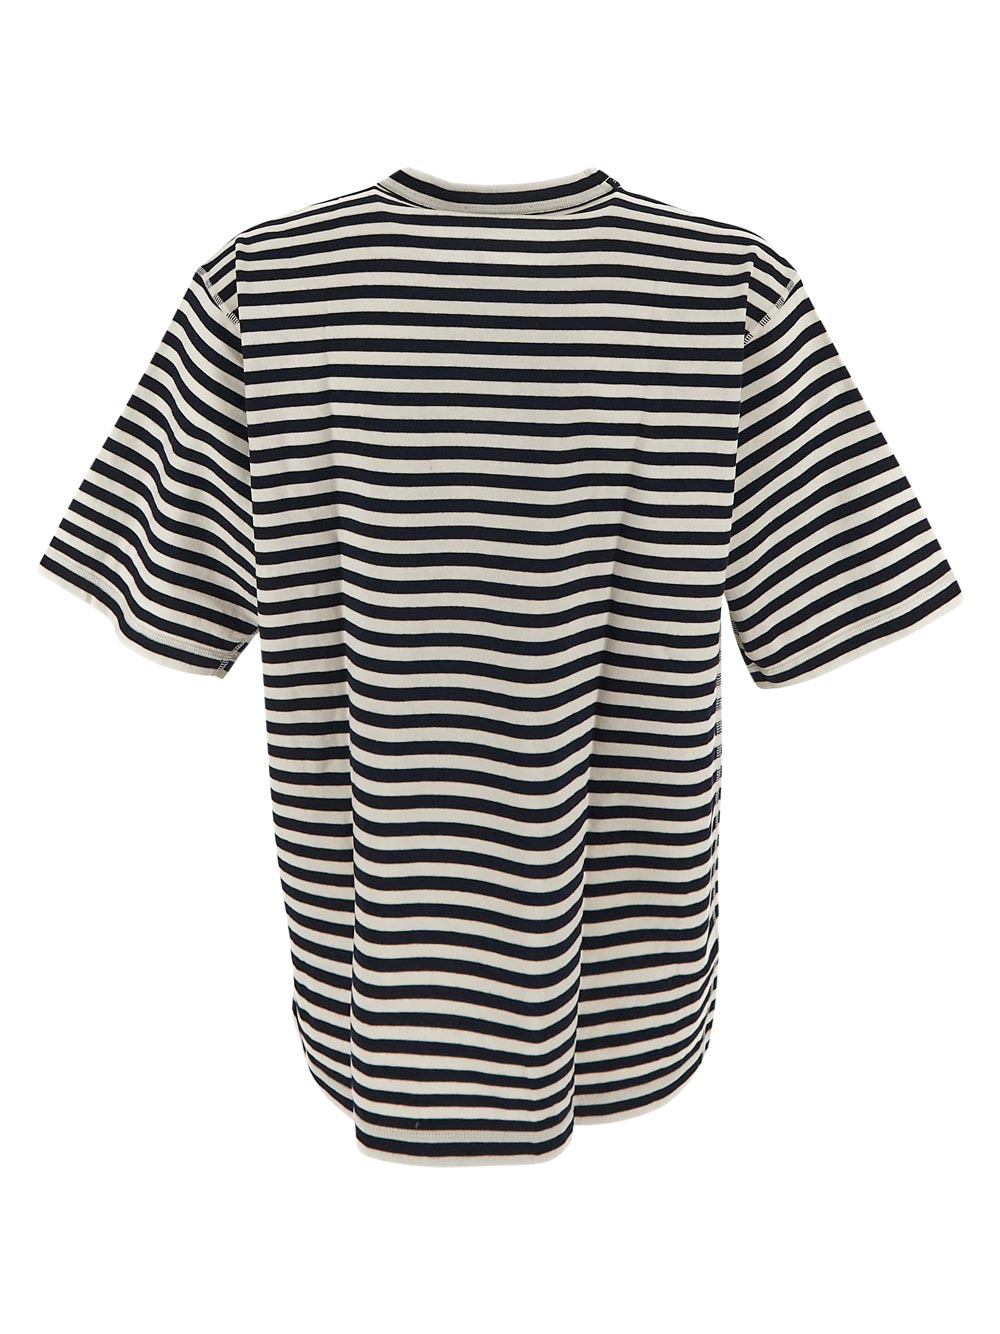 Dolce & Gabbana Striped Short-Sleeved T-Shirt With Logo